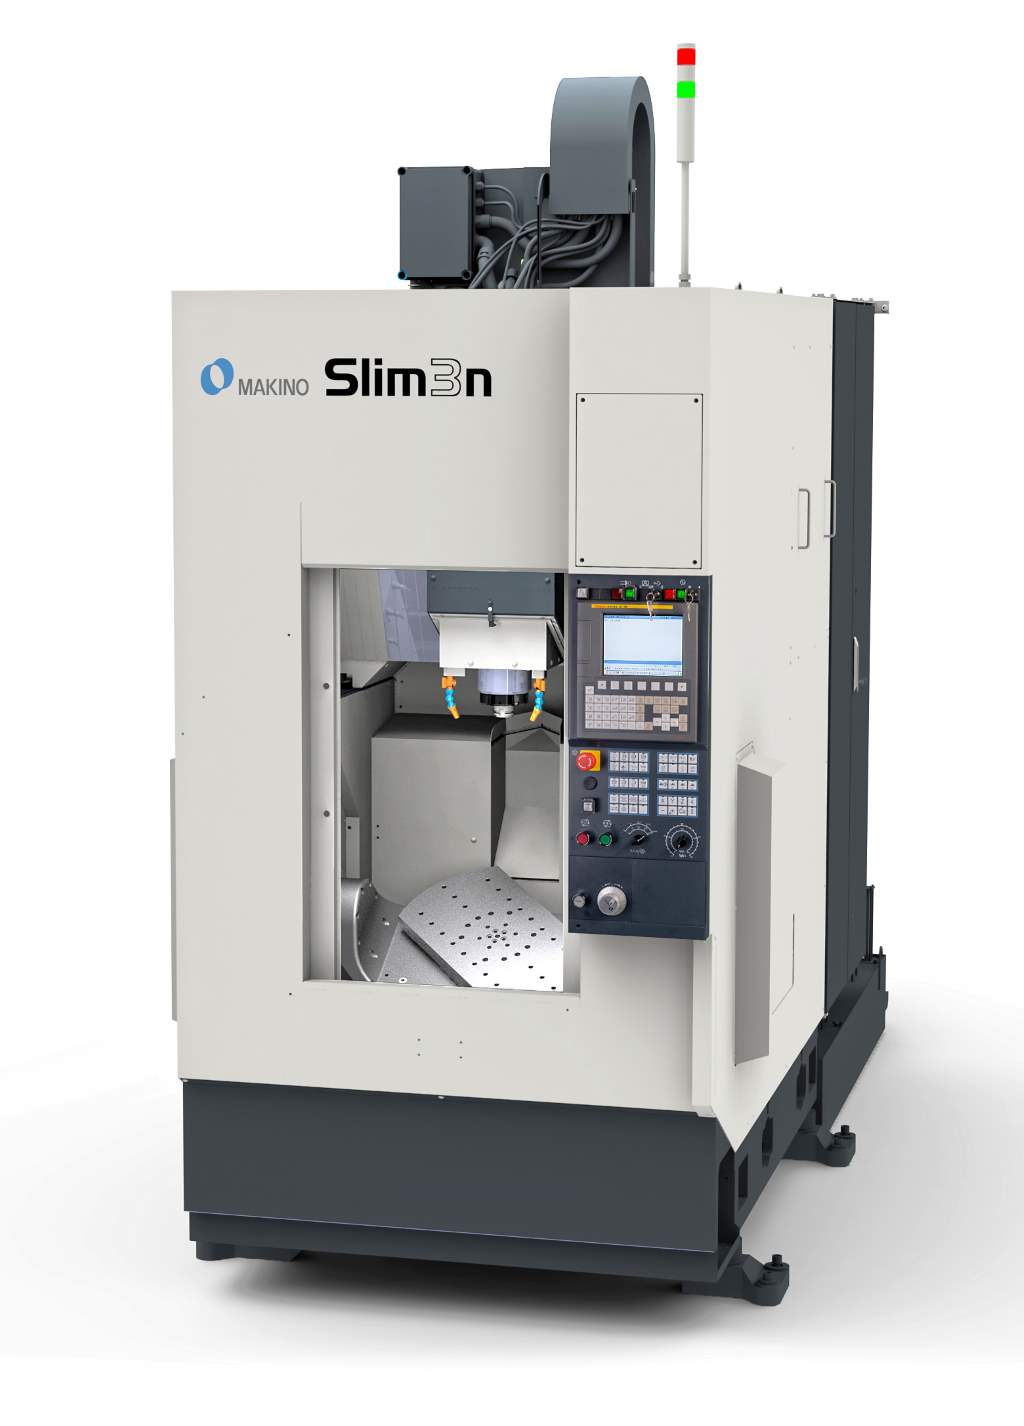 The new, Japanese-built Makino Slim3n trunnion-type, 5-axis, vertical machining centre is available in the UK and Ireland from NCMT